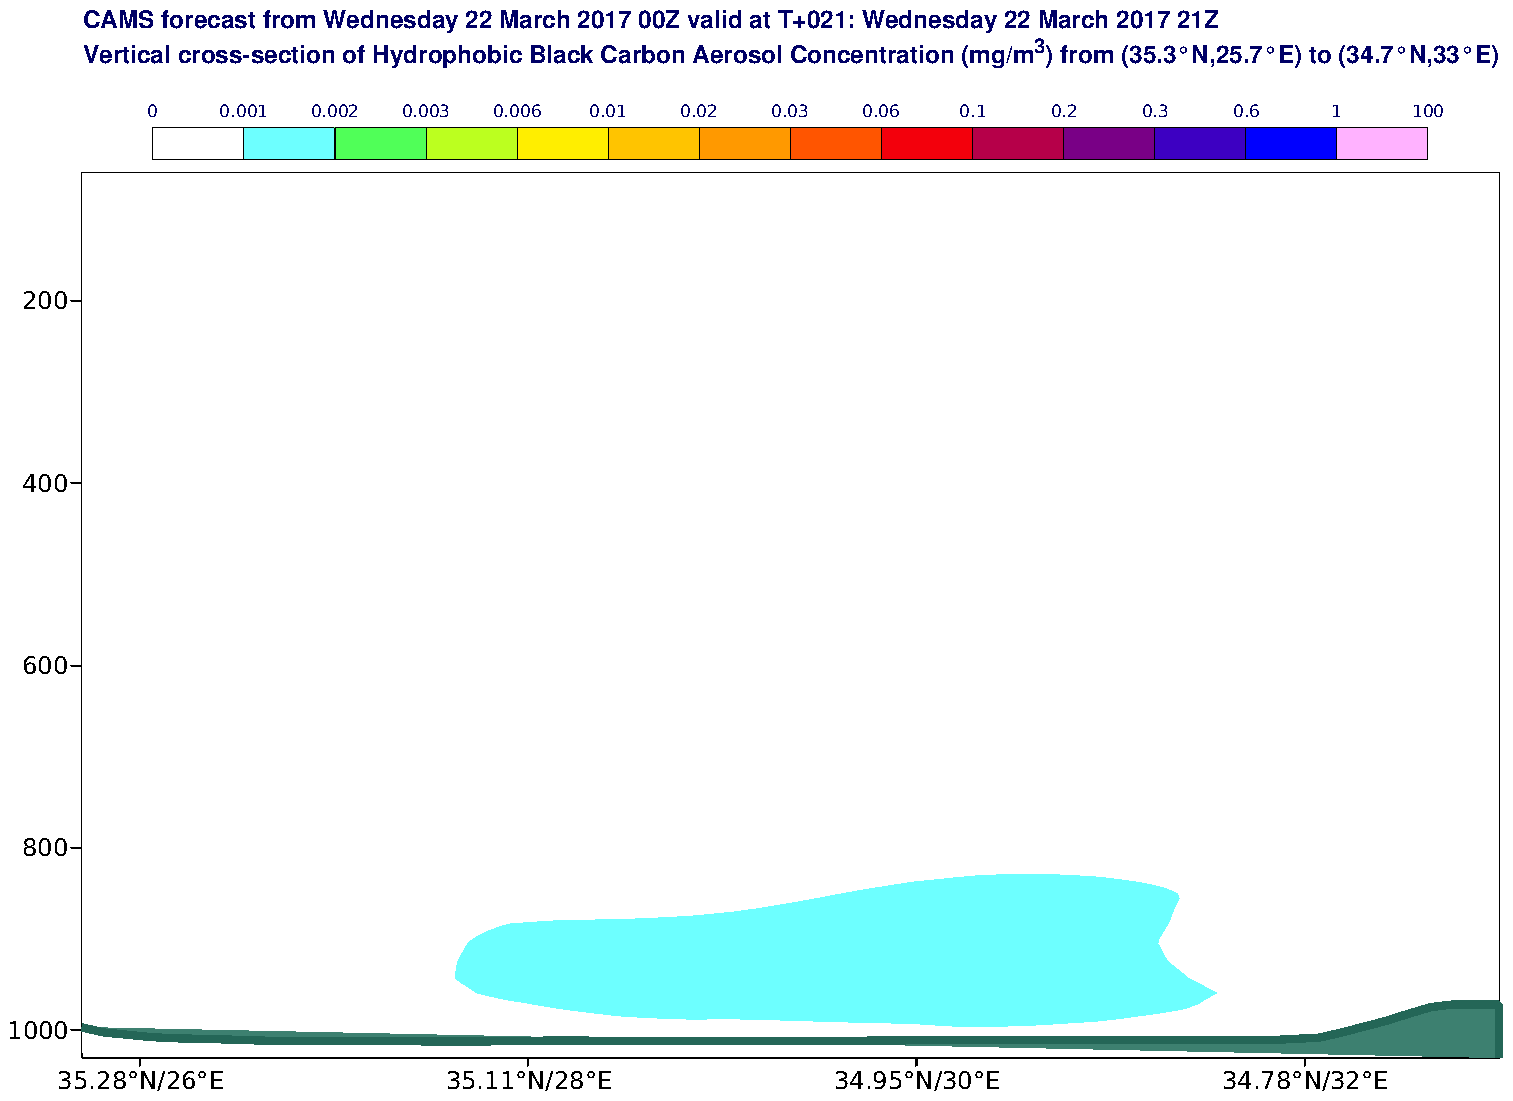 Vertical cross-section of Hydrophobic Black Carbon Aerosol Concentration (mg/m3) valid at T21 - 2017-03-22 21:00